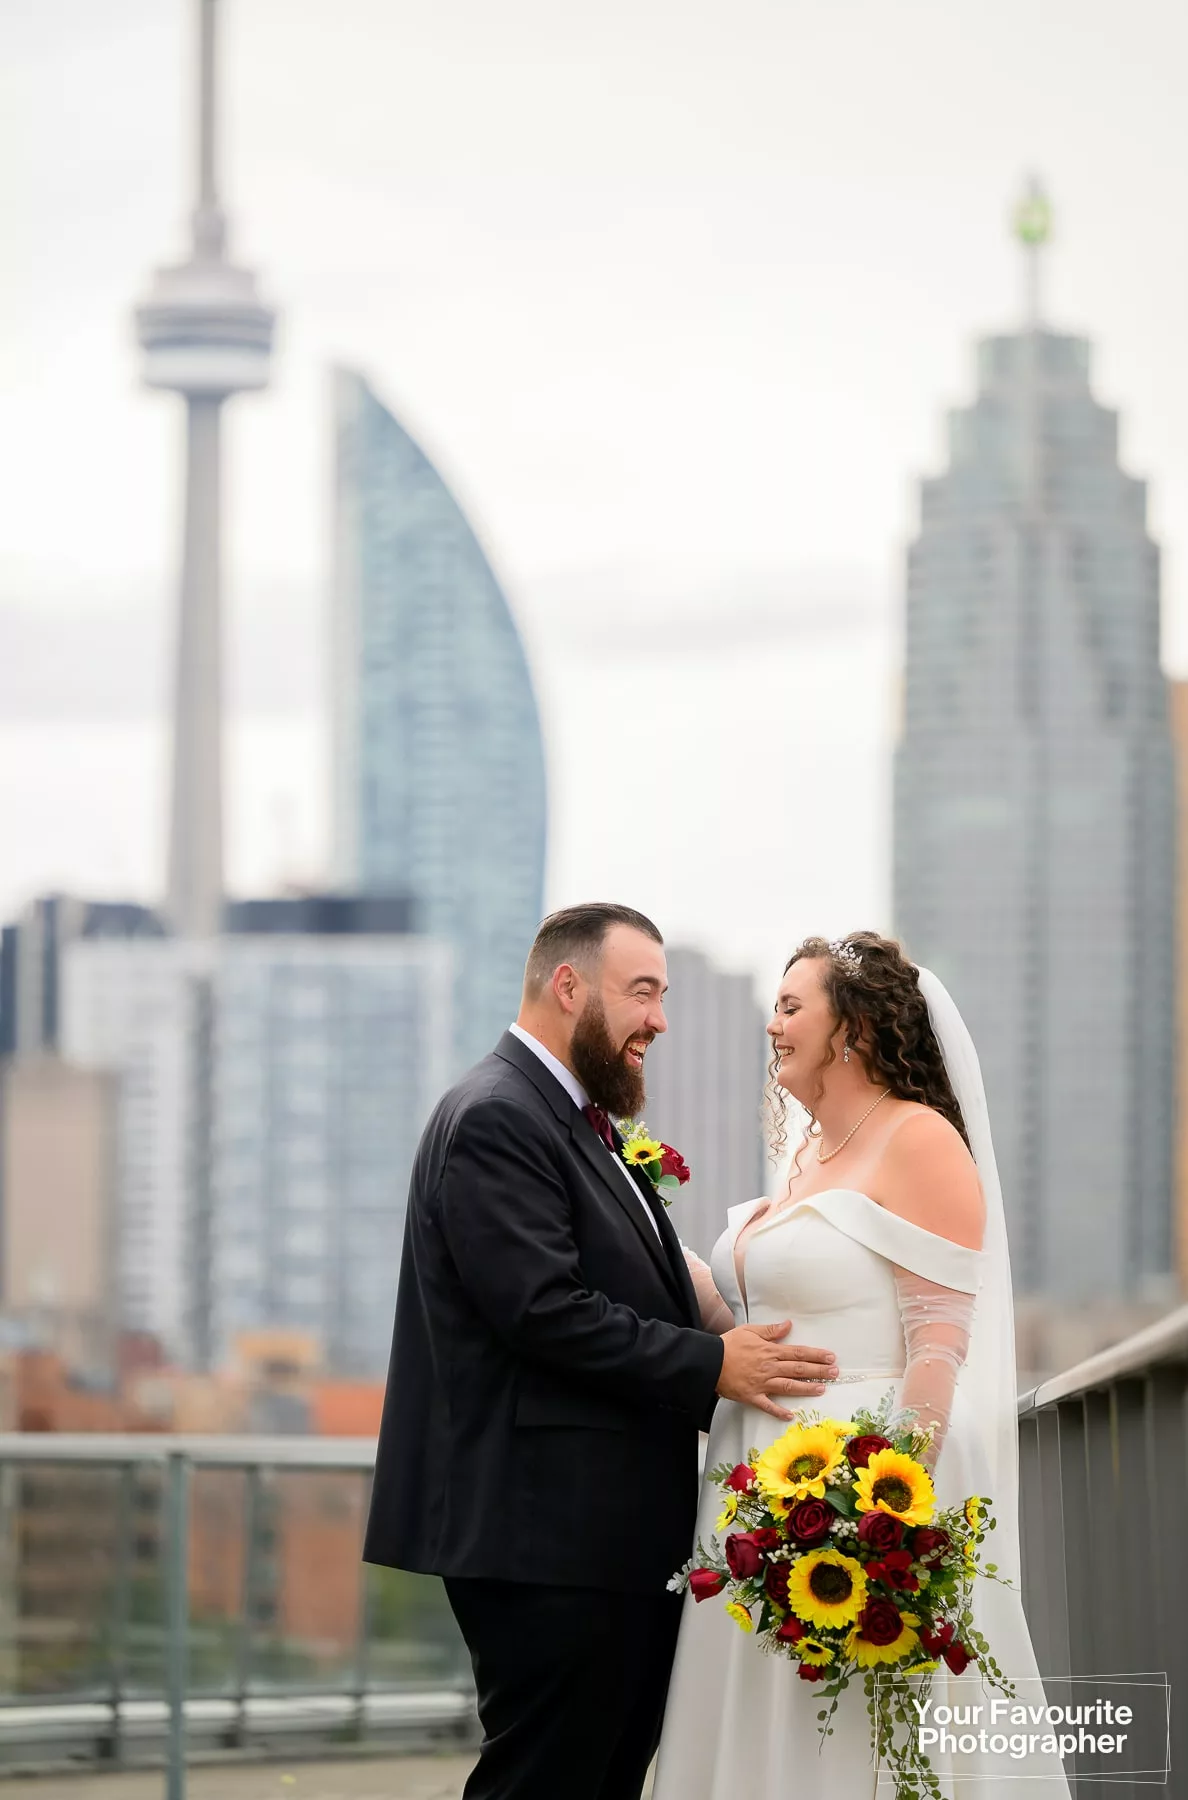 Bride and groom Emily and Niko pose on a rooftop patio with the skyline of downtown Toronto visible in the background